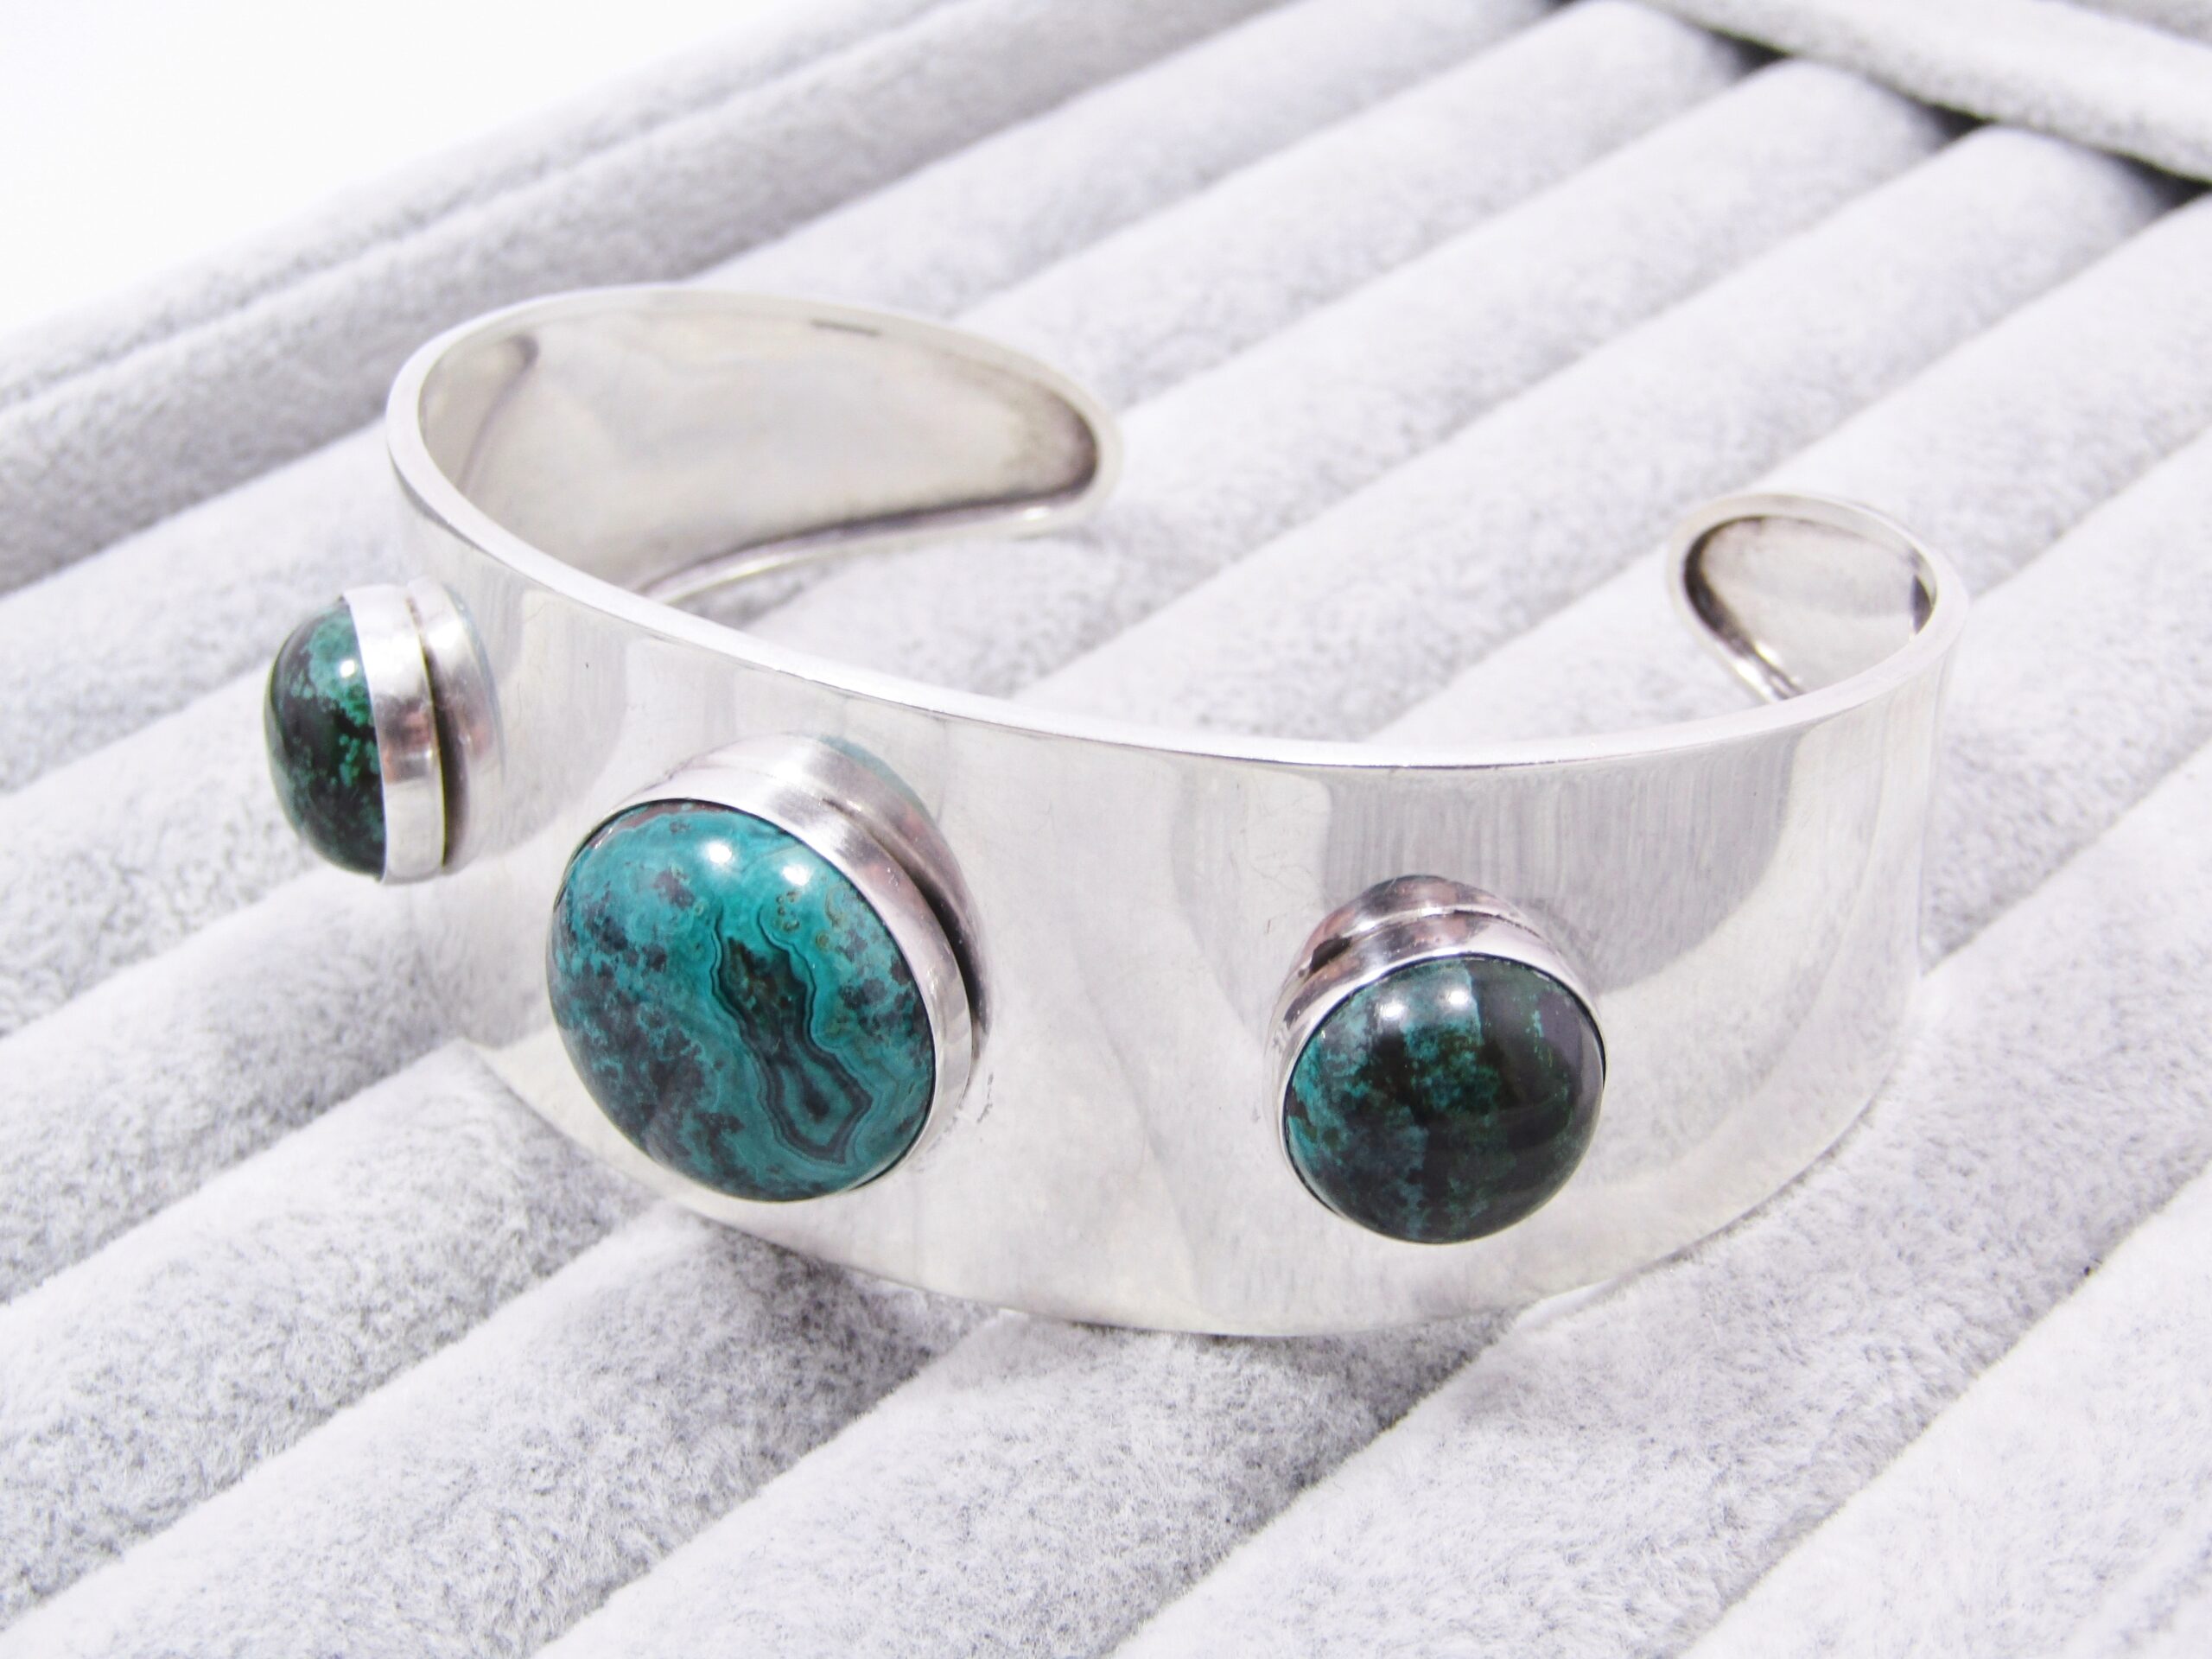 Gorgeous Chunky Cuff Bangle with Eilat Stones in Silver